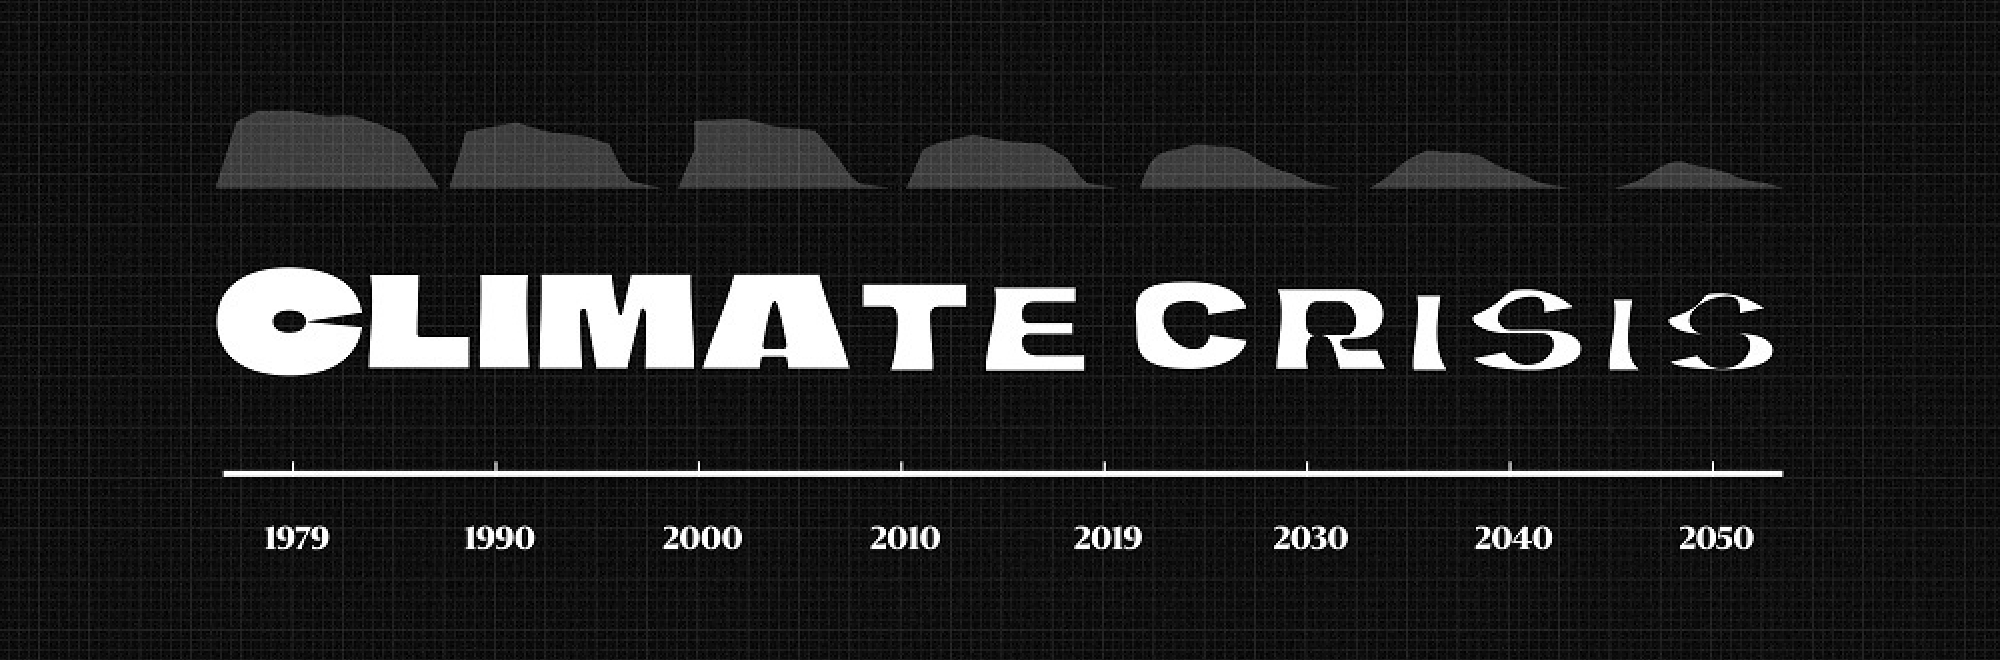 Why a font illustrating the climate crisis is well intentioned but falls short